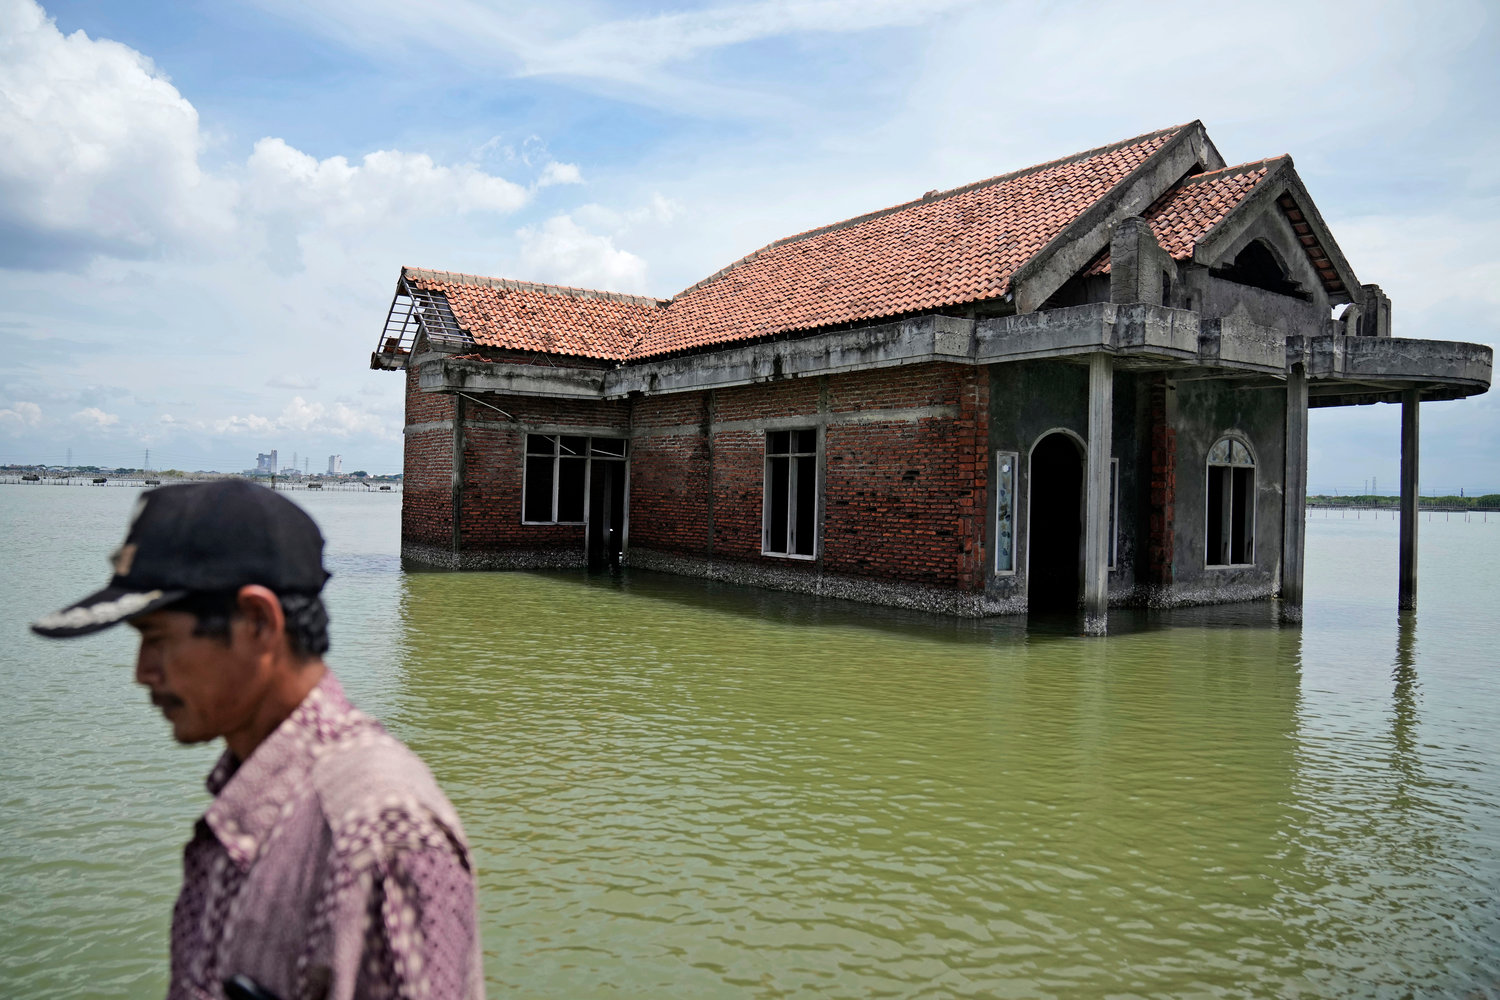 A man walks past a house abandoned after it was inundated by water due to the rising sea level in Sidogemah, Central Java, Indonesia, Nov. 8, 2021. Climate hazards such as flooding, heat waves and drought have worsened more than half of the hundreds of known infectious diseases in people, such as malaria, hantavirus, cholera and even anthrax, according to a new study released Monday, Aug. 8, 2022.